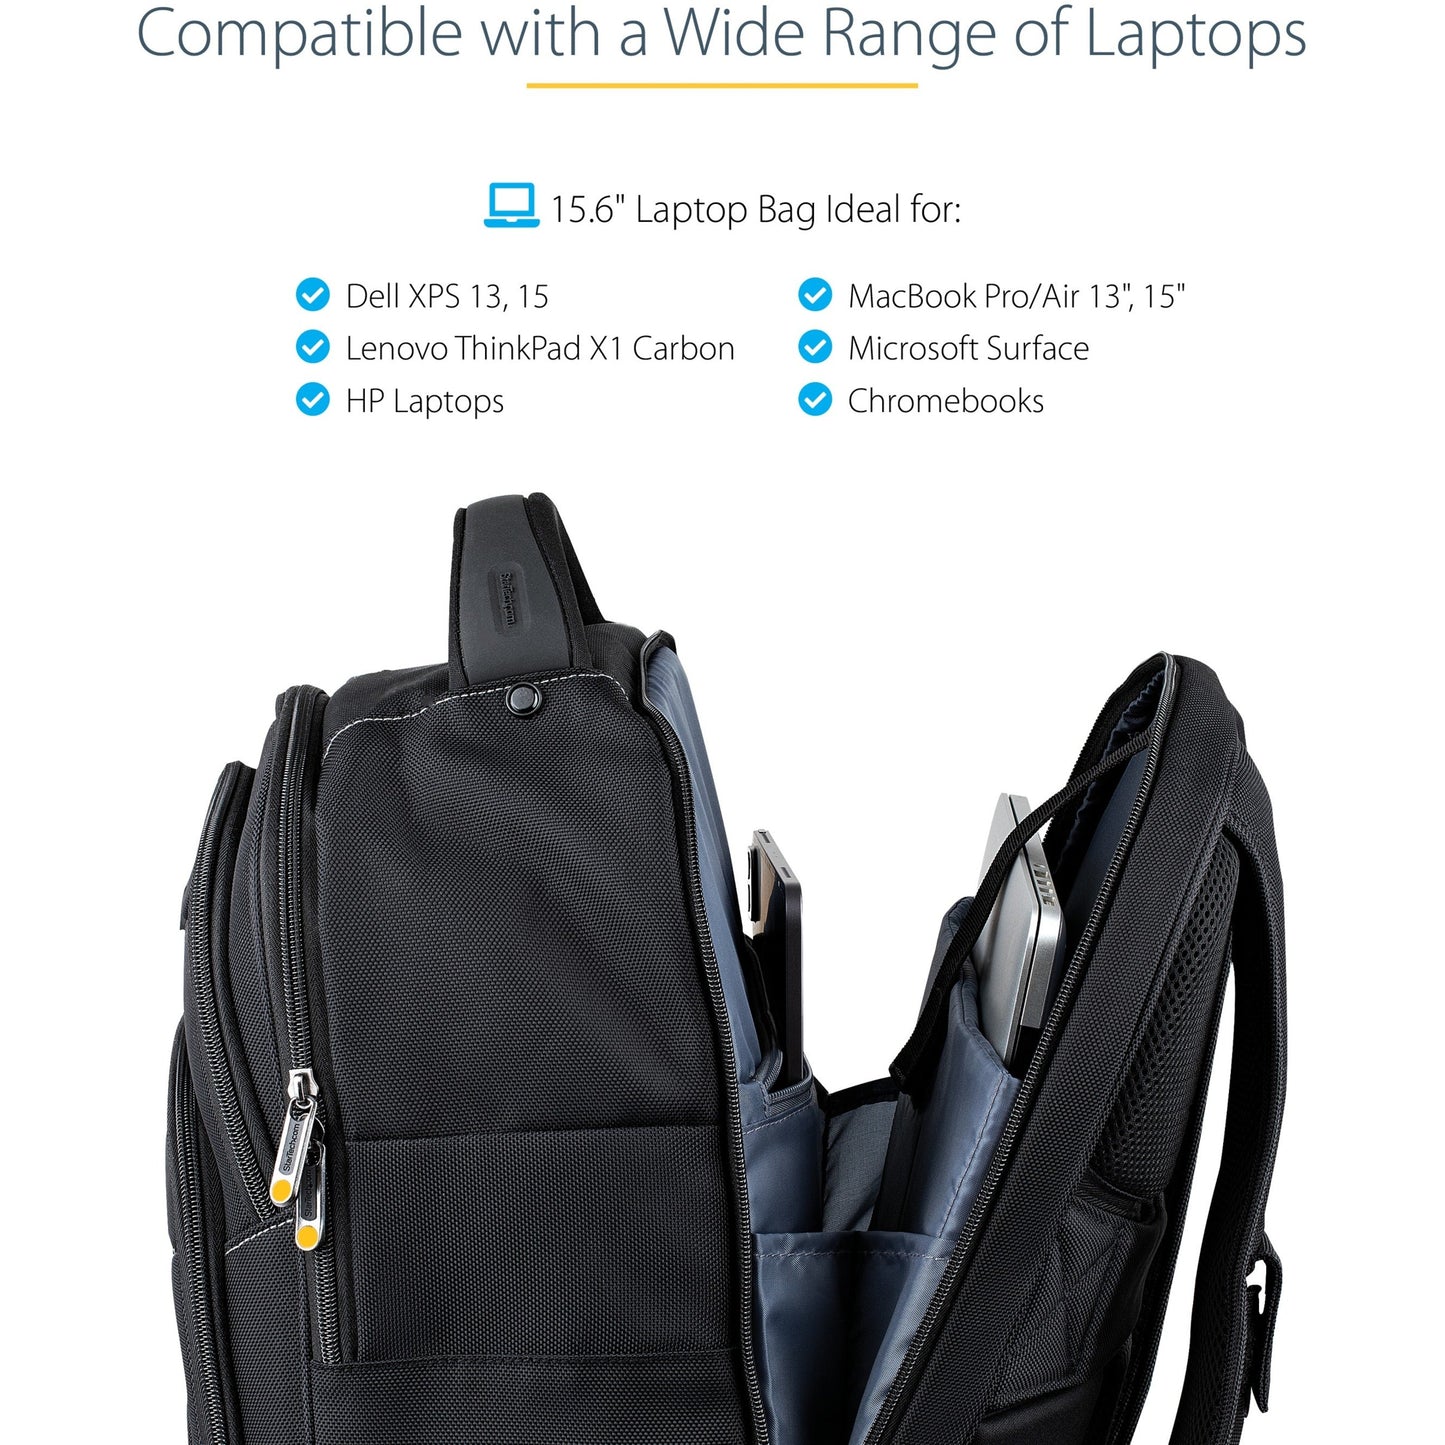 StarTech.com 15.6" Laptop Backpack w/ Removable Accessory Case Professional IT Tech Backpack for Work/Travel/Commute Nylon Computer Bag